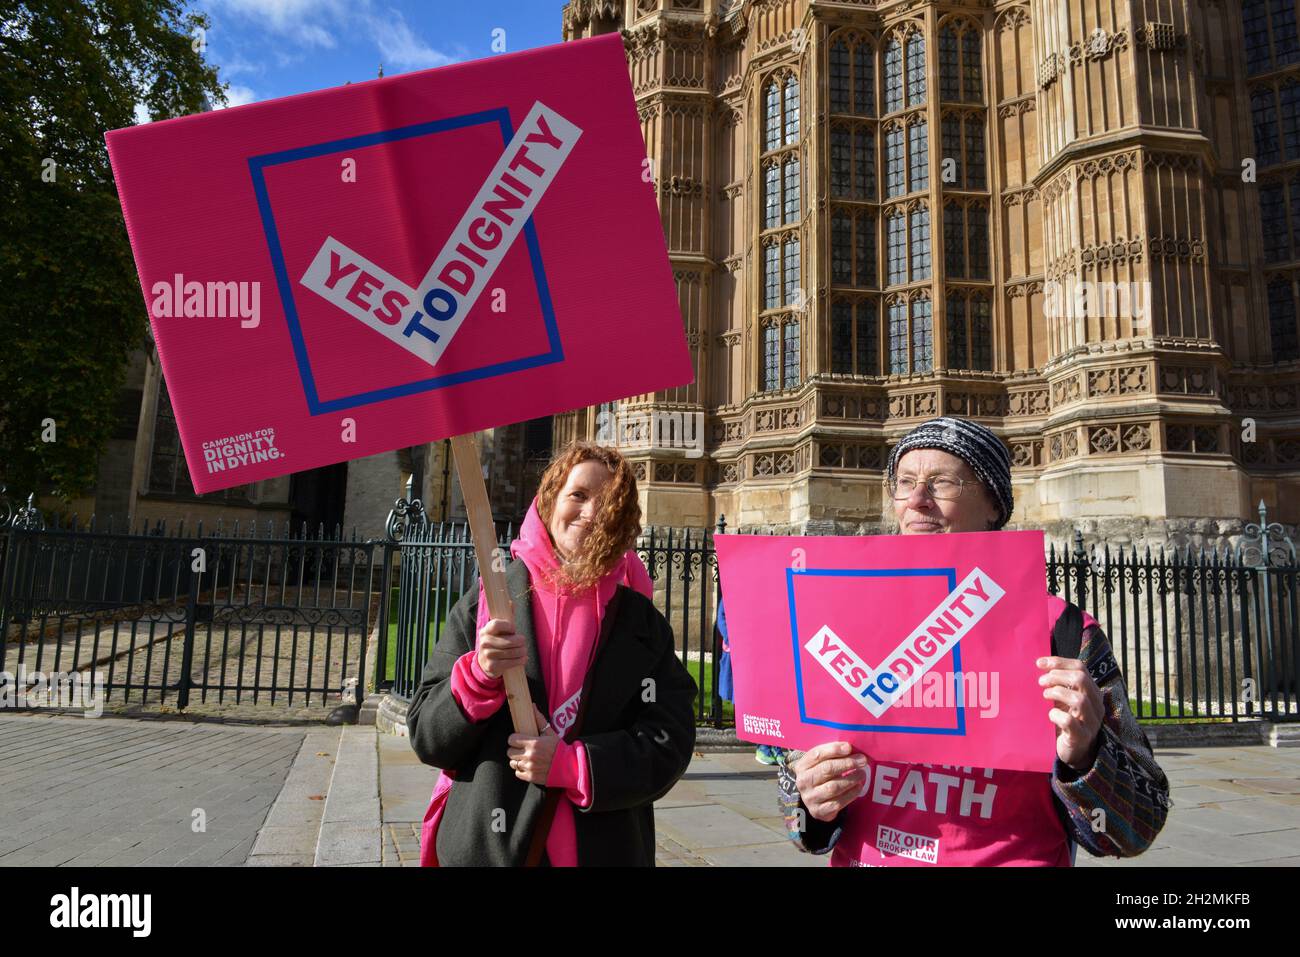 Protesters seen holding placards expressing their opinion at Abingdon Street during the demonstration. Protesters support legal euthanasia for terminally ill patients with full mental capacity, and who are not expected to live more than six months. Stock Photo